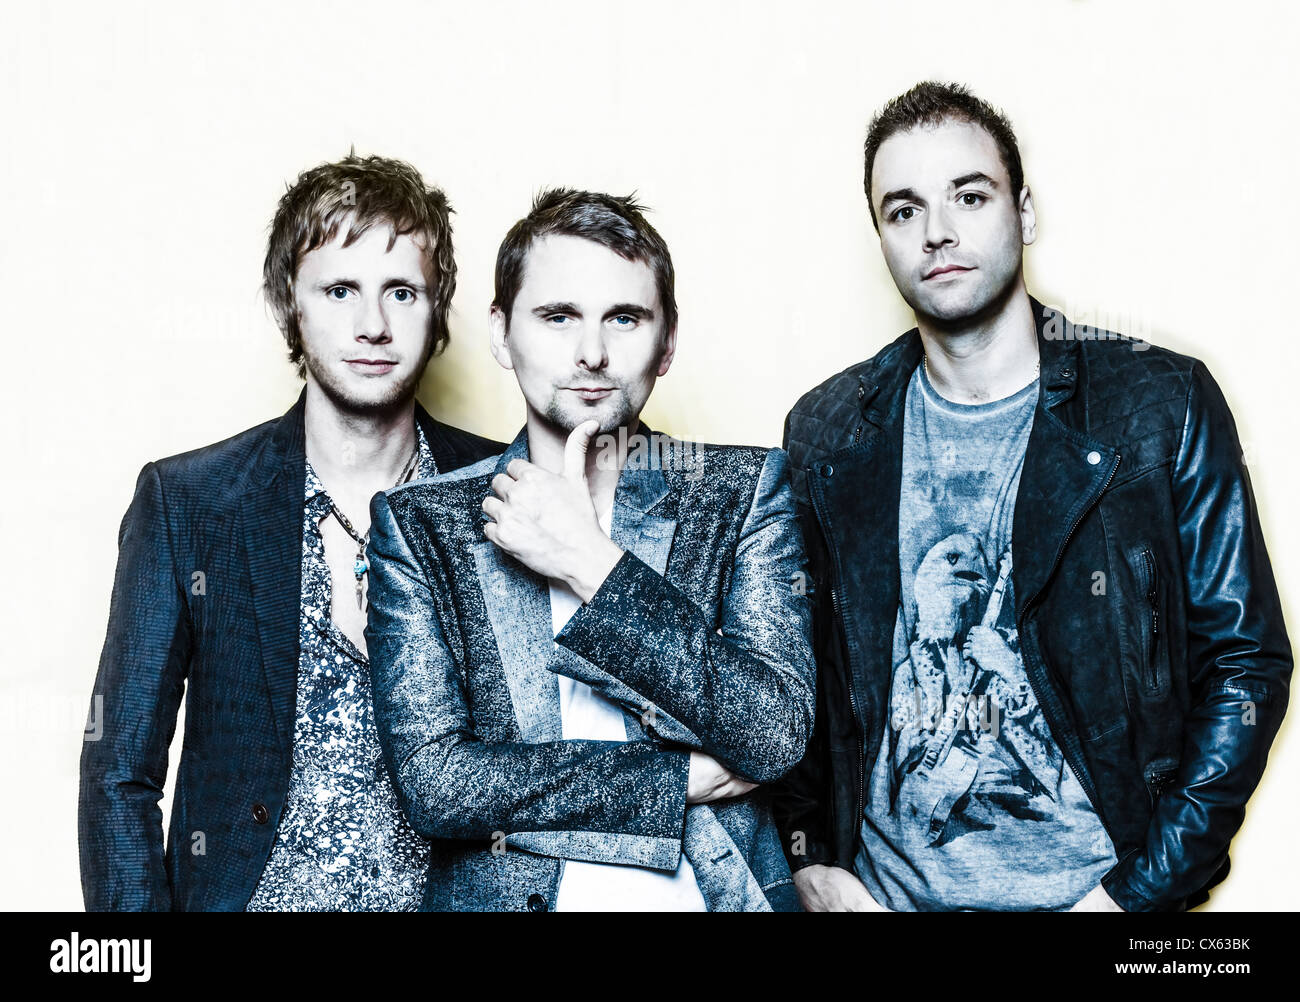 Paris, France - July 04, 2012: Portrait of the english rock group Muse with Matthew Bellamy, Dominic Howard and Christopher Wolstenholme at Paris, France on july 4th, 2012 Stock Photo